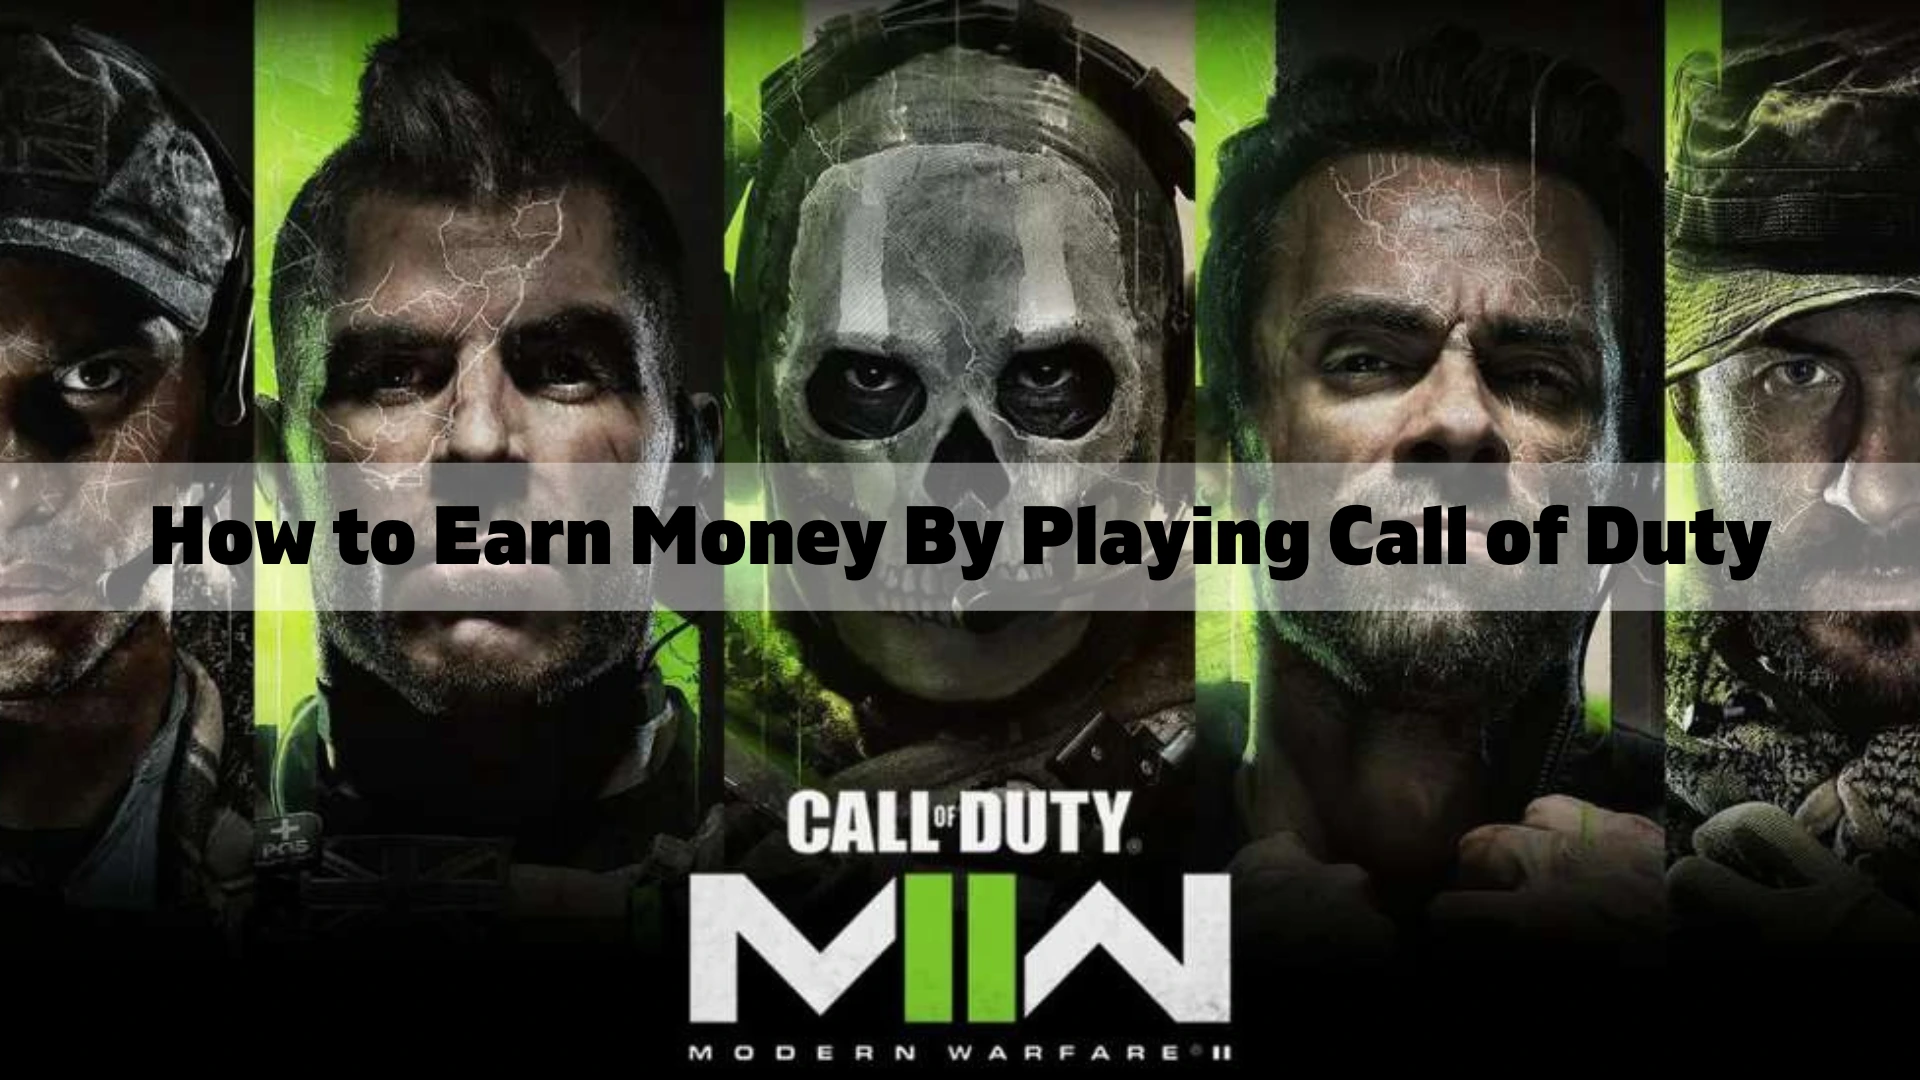 How to Earn Money By Playing Call of Duty